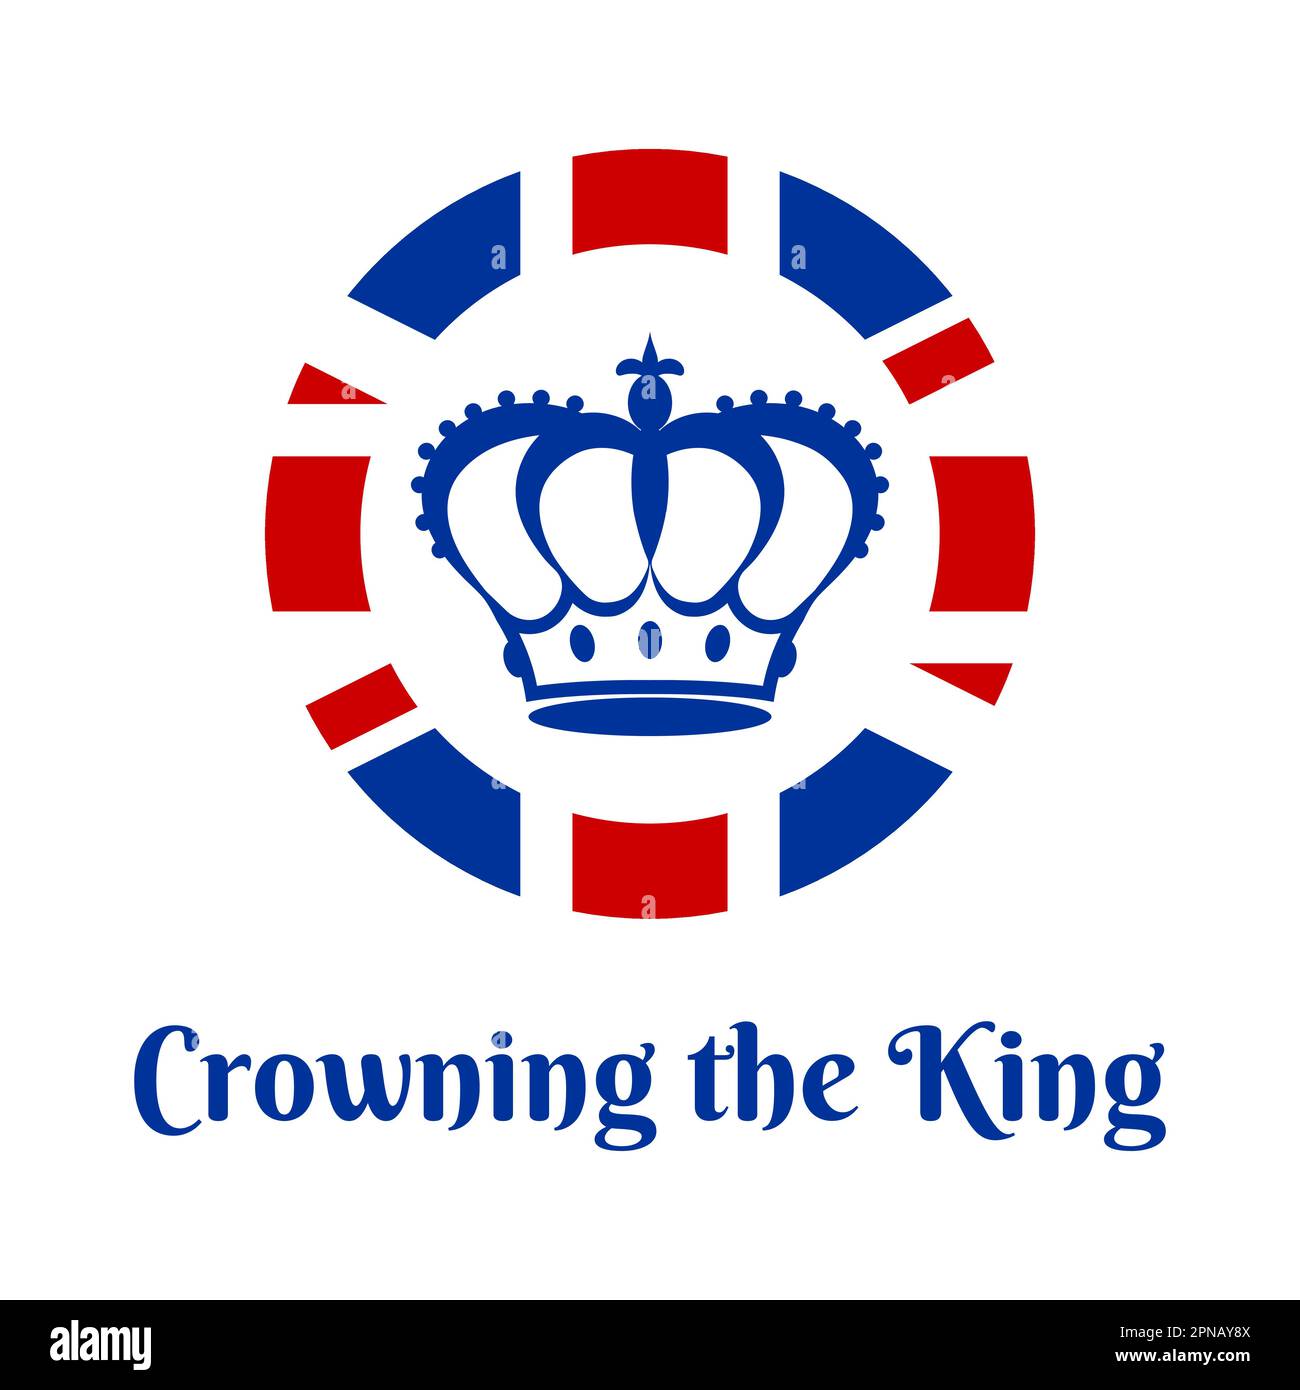 Greeting card in honor of the coronation. Congratulatory background with crown silhouette and text Crowning the King. White, red, blue colors. Vector Stock Vector